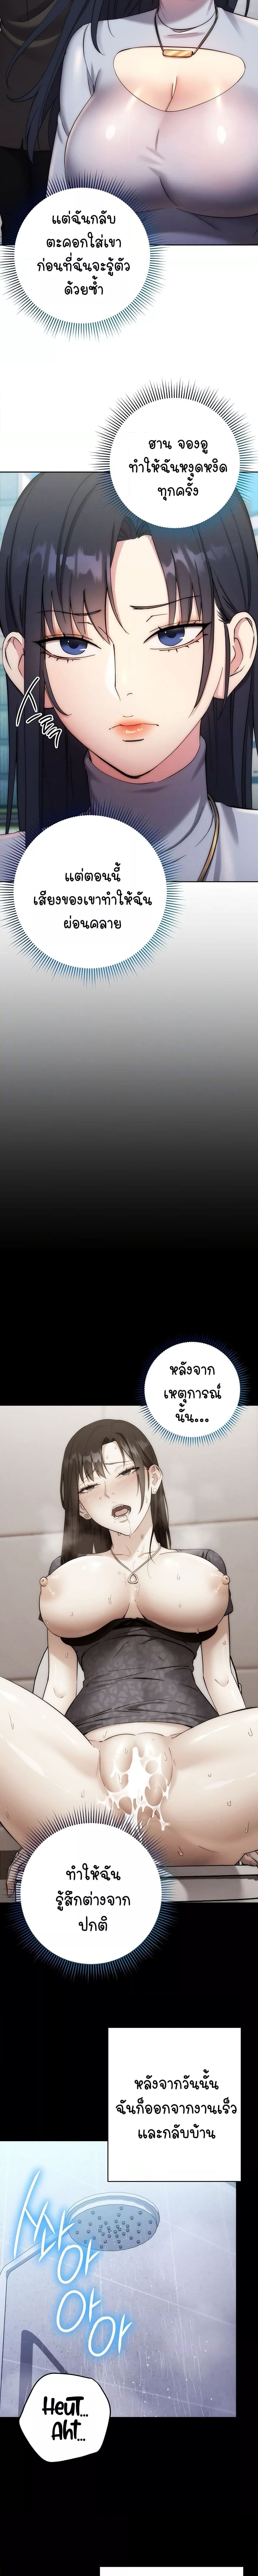 Outsider: The Invisible Man ตอนที่ 11 ภาพ 3